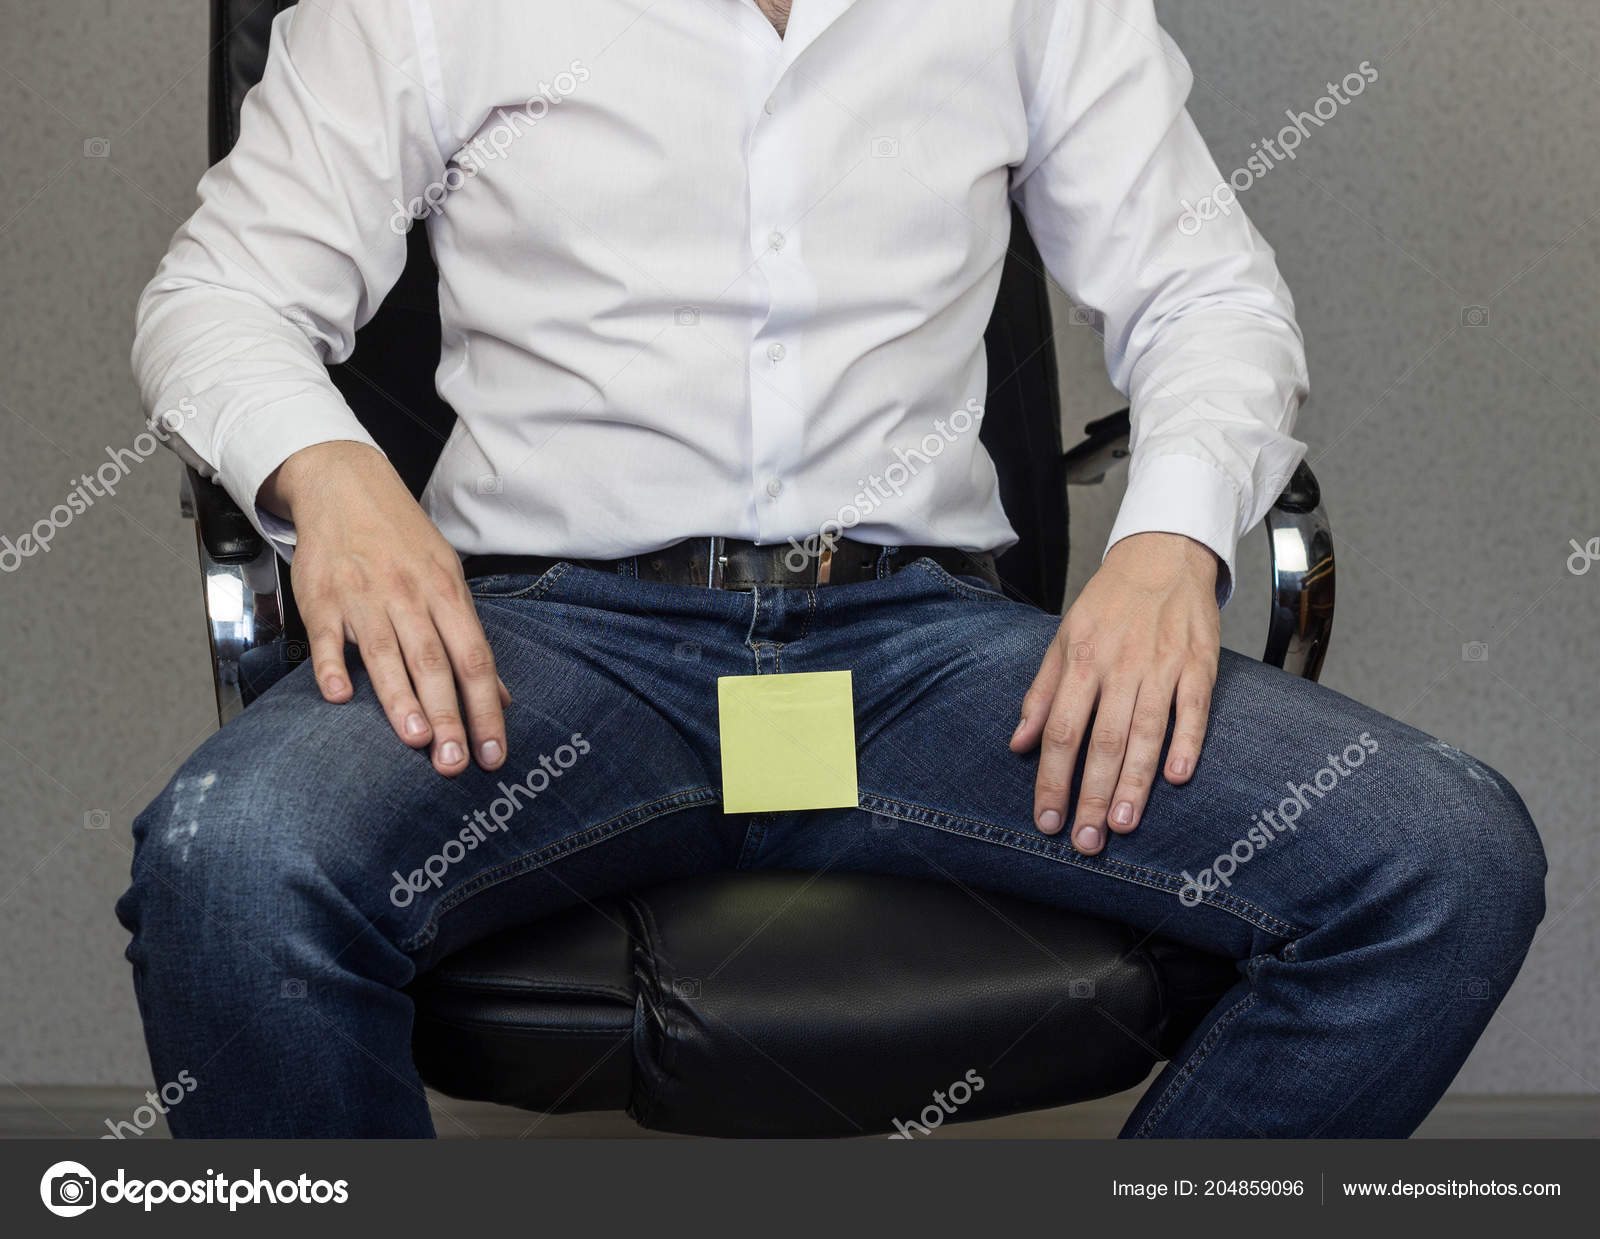 A man is sitting in an office chair, on the crotch and groin is